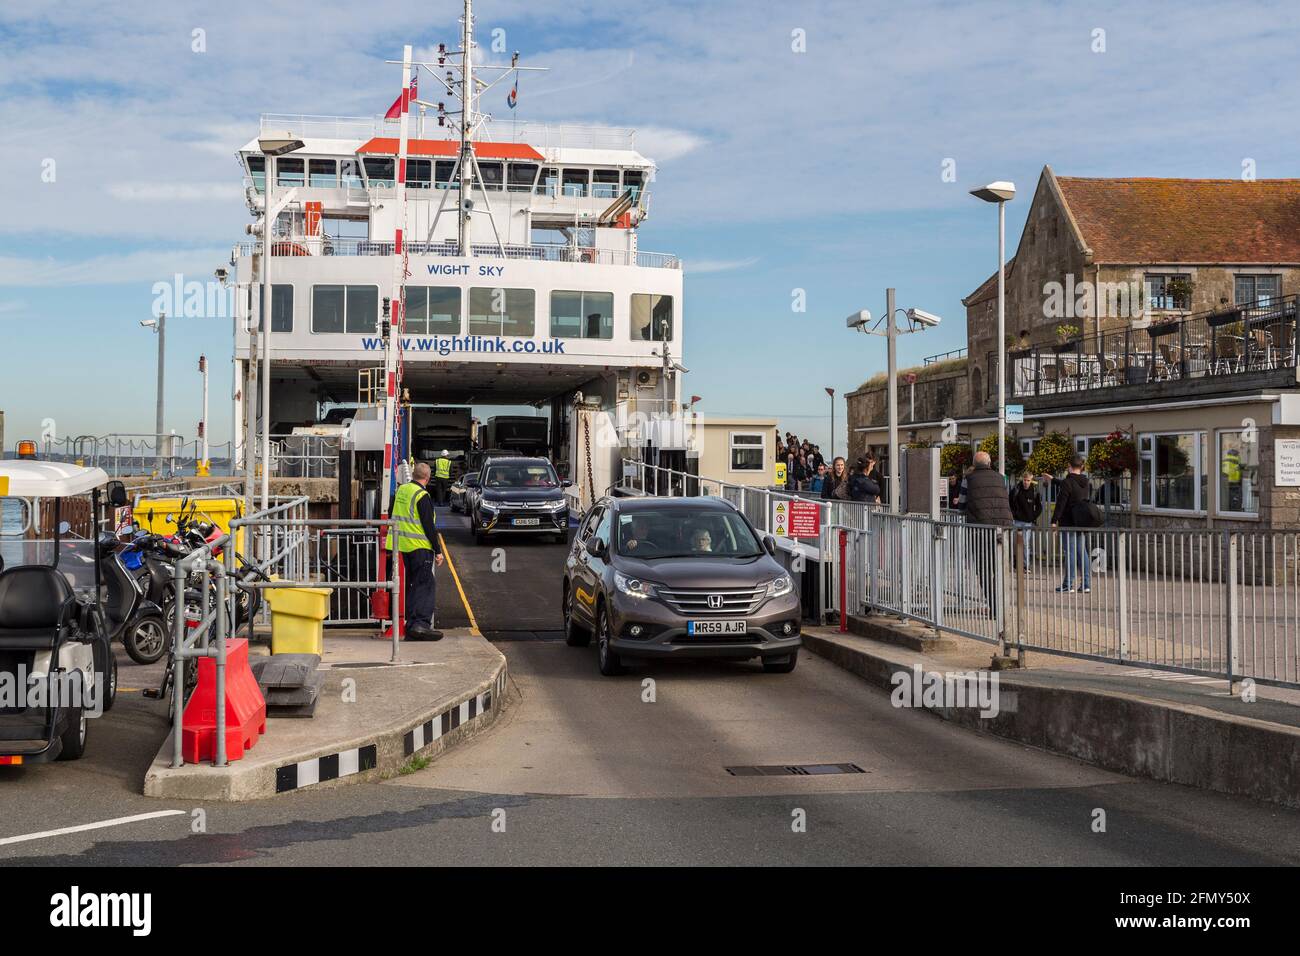 Wightlink ferry, Yarmouth, Isle of Wight, UK Stock Photo